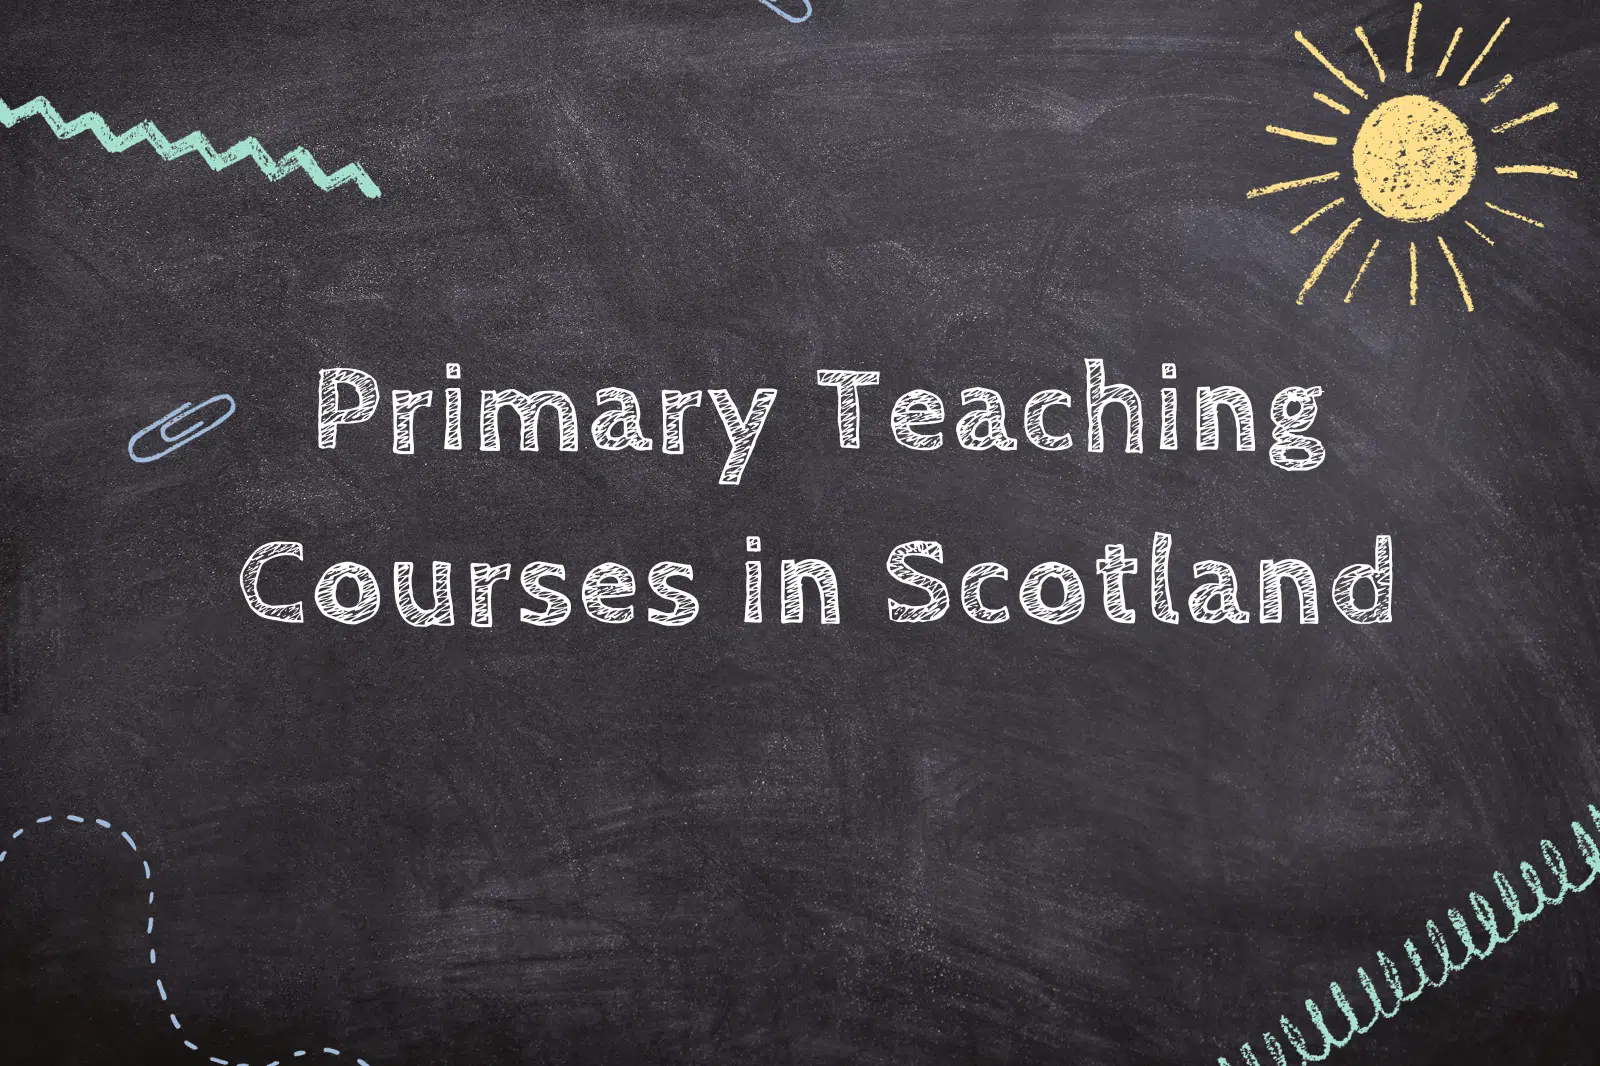 Primary Teaching Courses in Scotland